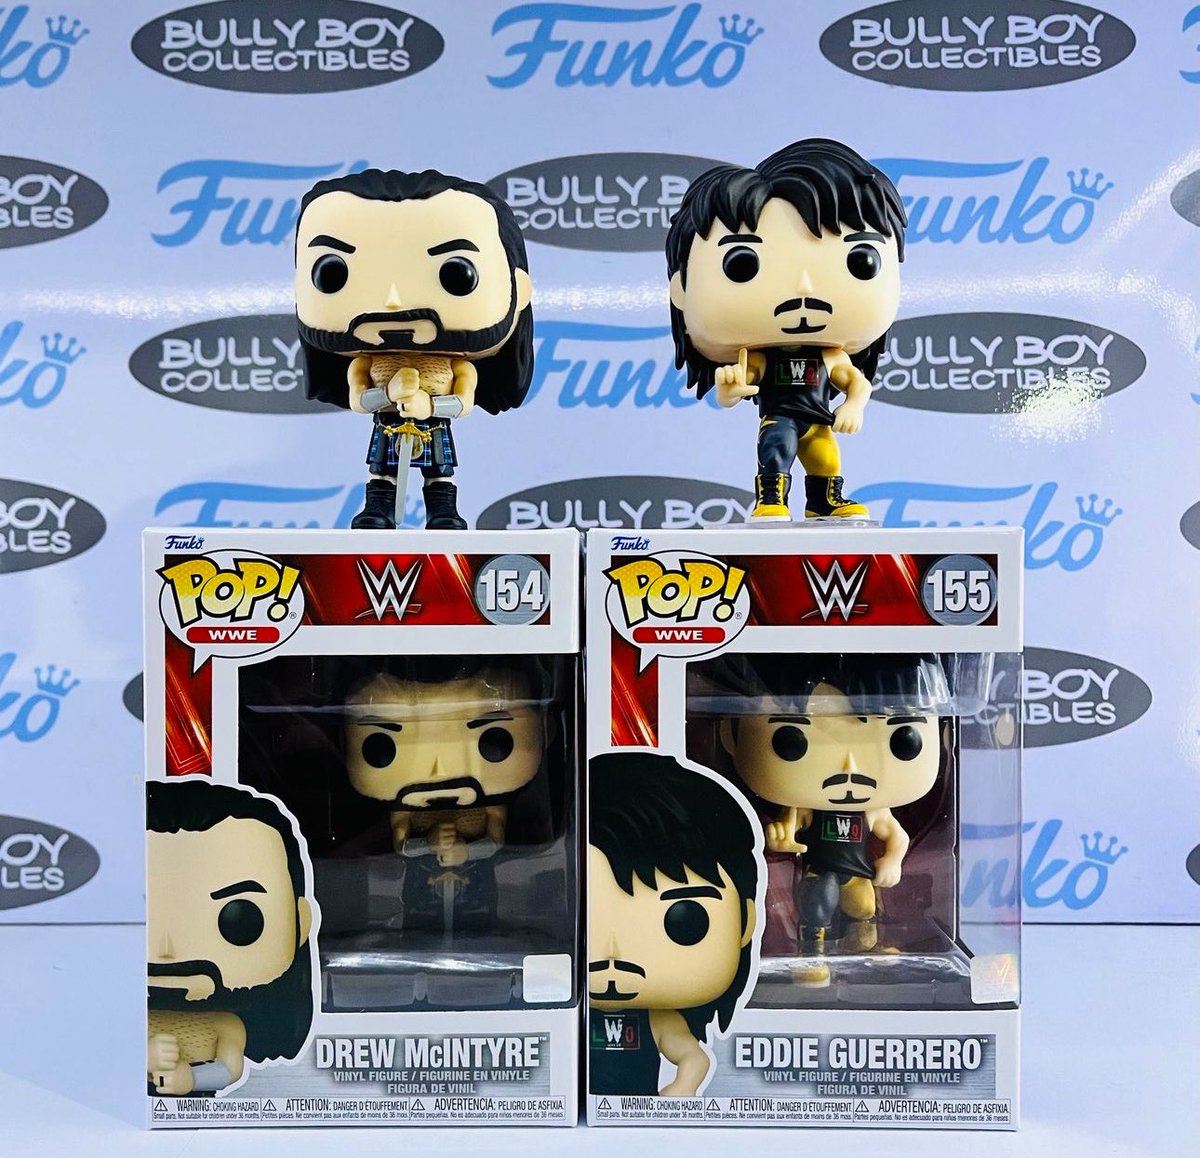 Closer look at Drew McIntyre & Eddie Guerrero Pops! Available for preorder. #Ad #WWE #Wrestler . Entertainment Earth - distracker.info/3H7AHqG Amazon - amzn.to/4aHMJUI Credit @bullyboycollectibles #Funko #FunkoPop #FunkoPopVinyl #Pop #PopVinyl #Collectibles #Collectible